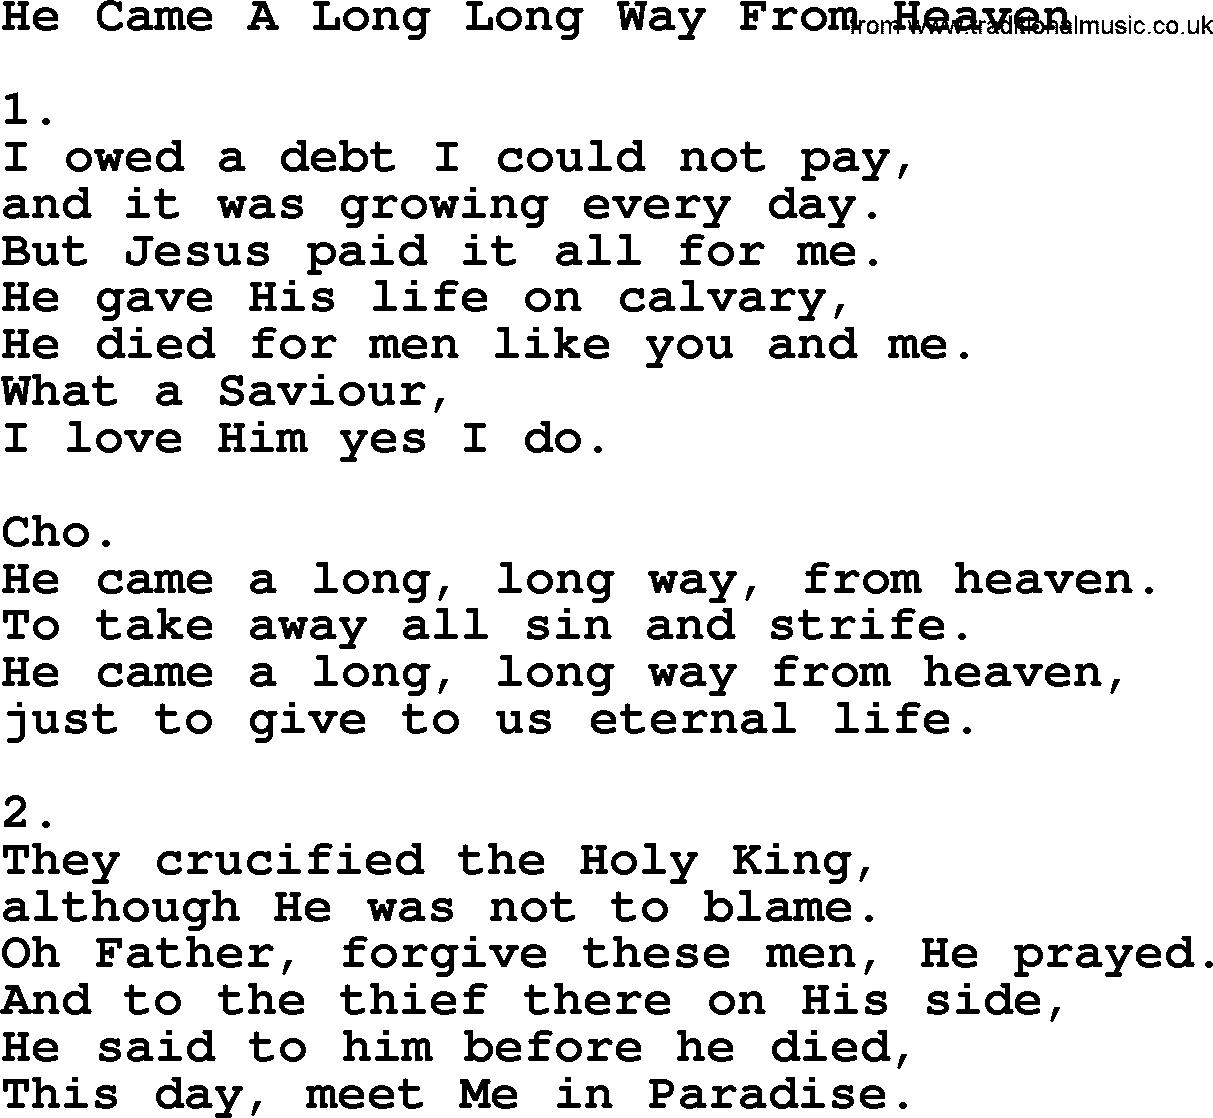 He Came A Long Long Way From Heaven - Apostolic and Pentecostal Hymns